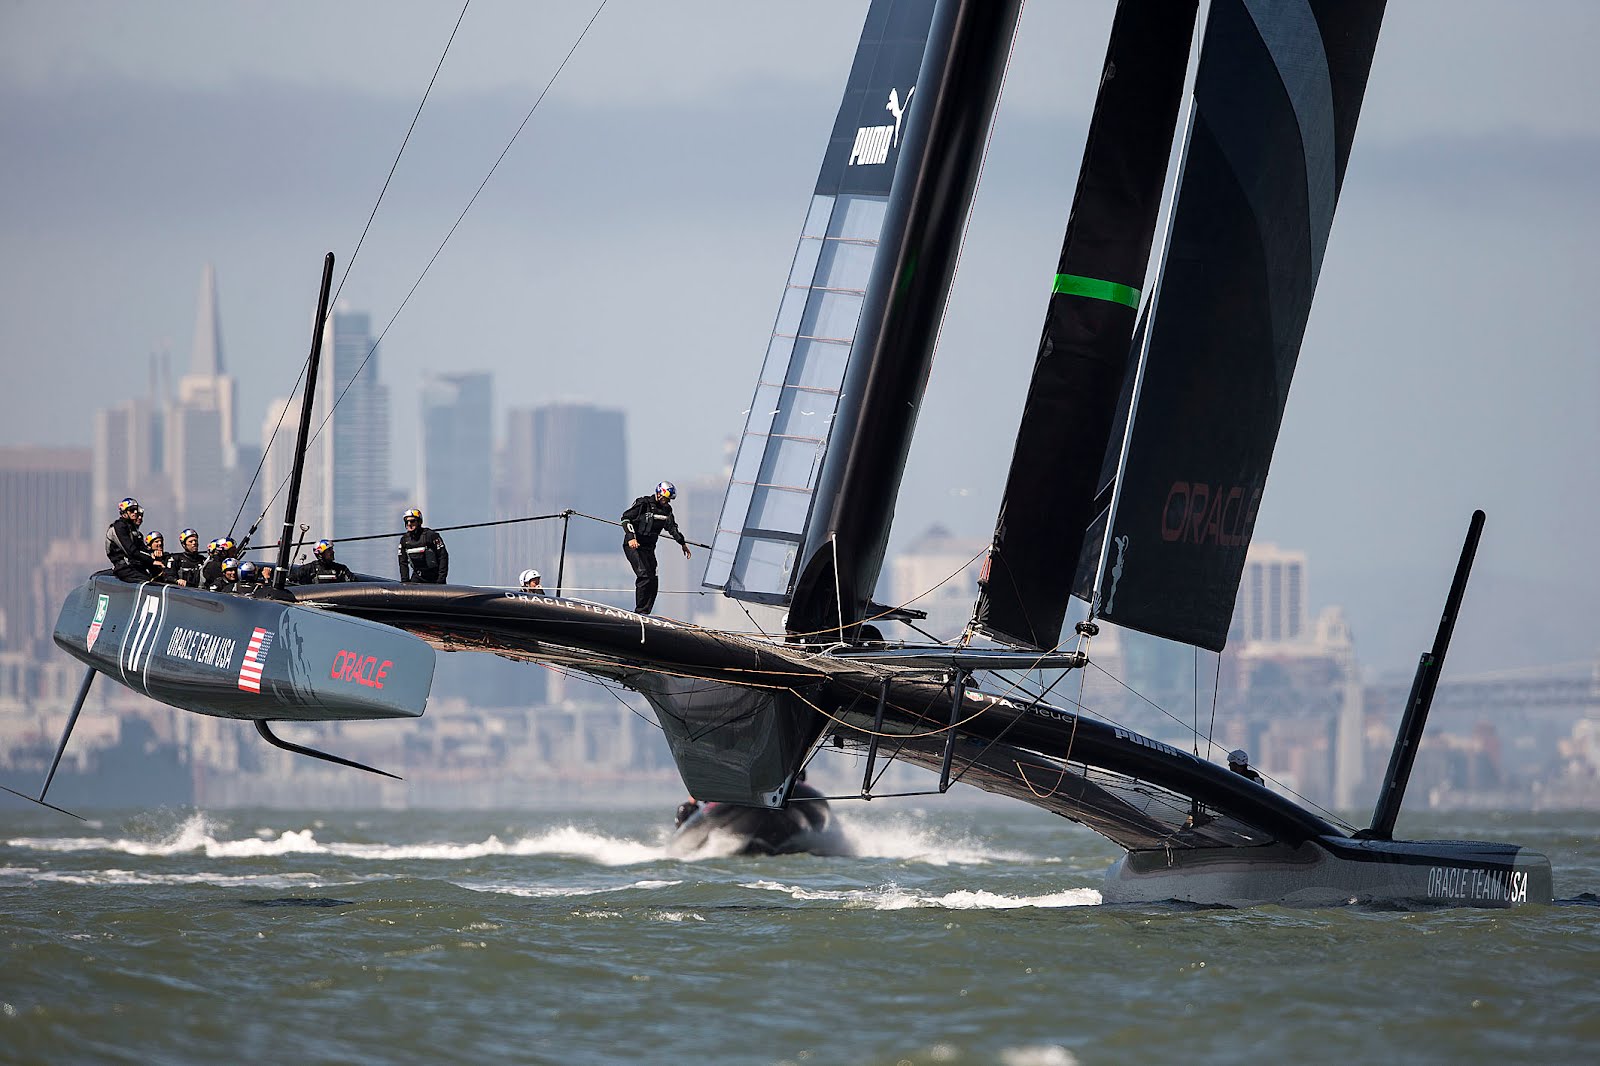 Oracle Team USA 17 is back on the water. San Francisco, 17 September 